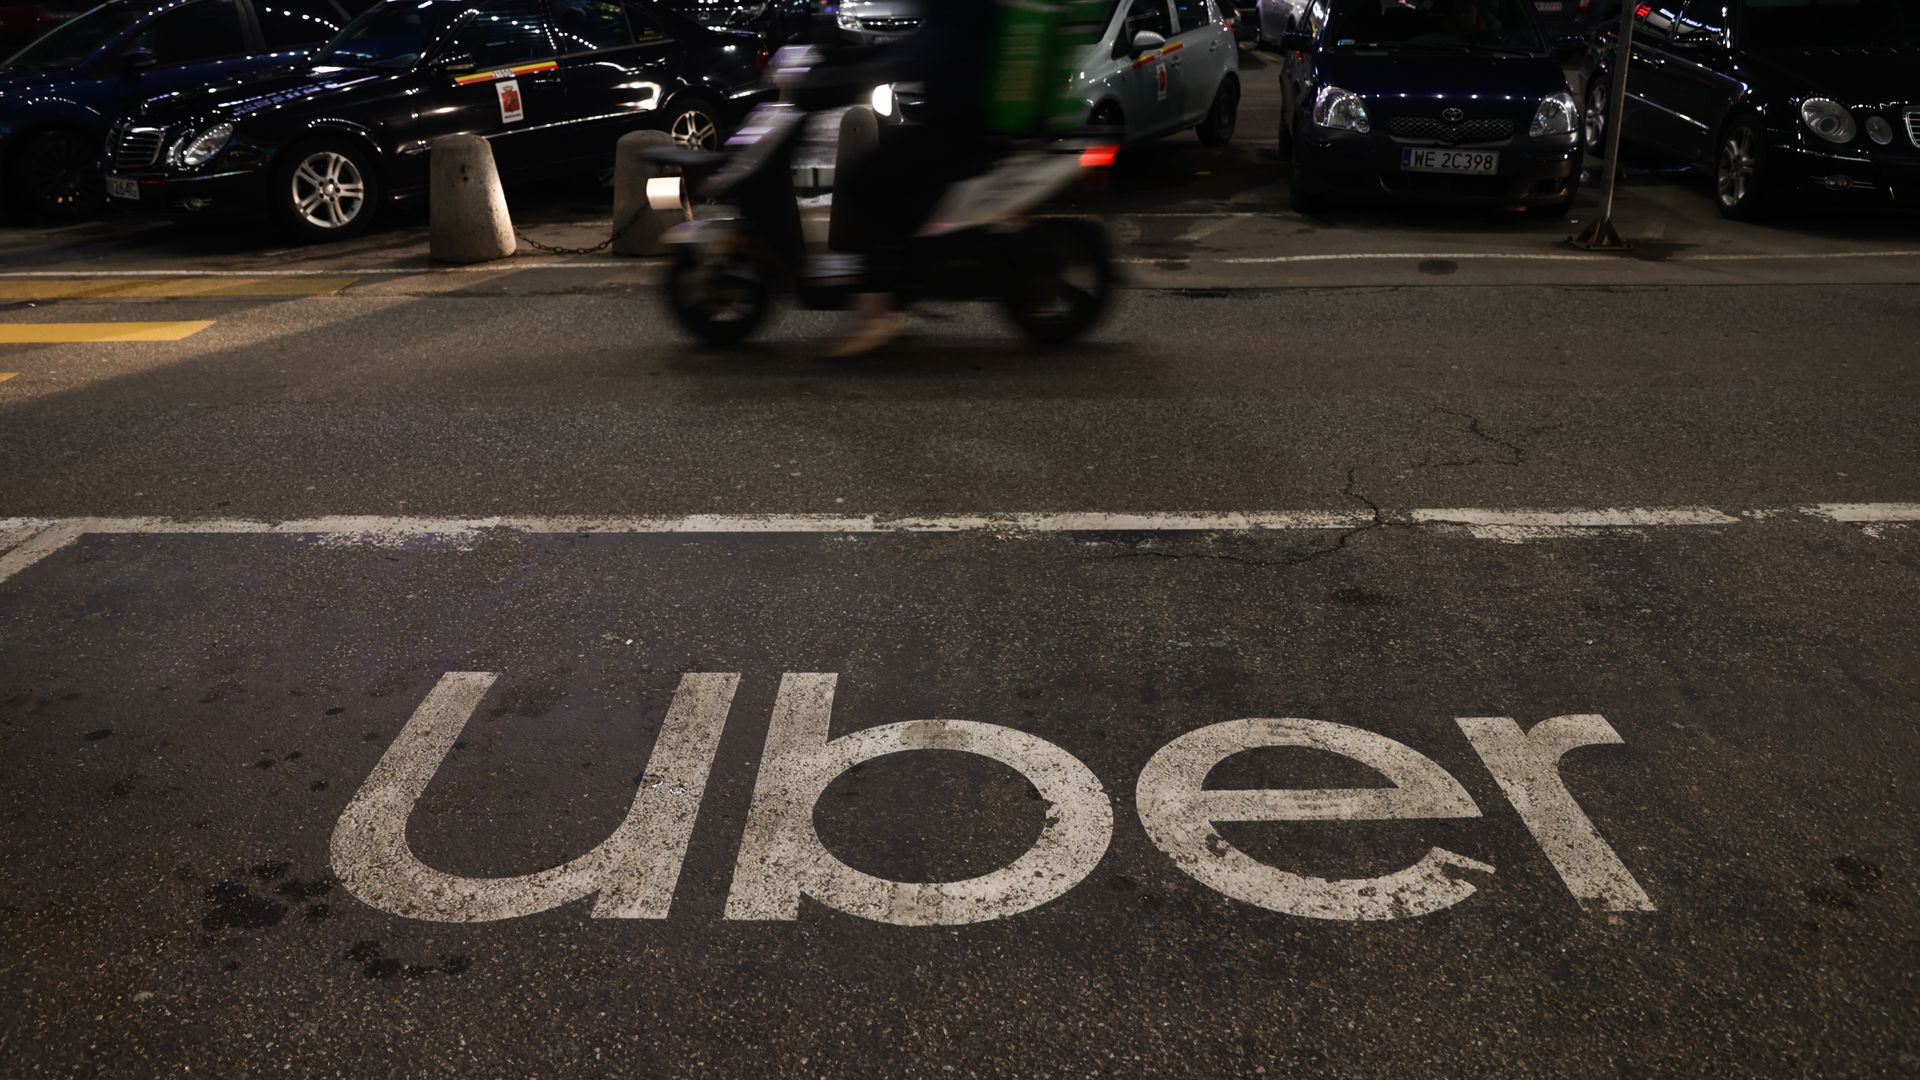 An Uber logo written on the blacktop pavement of a parking lot with a motorcycle zooming past in the background.